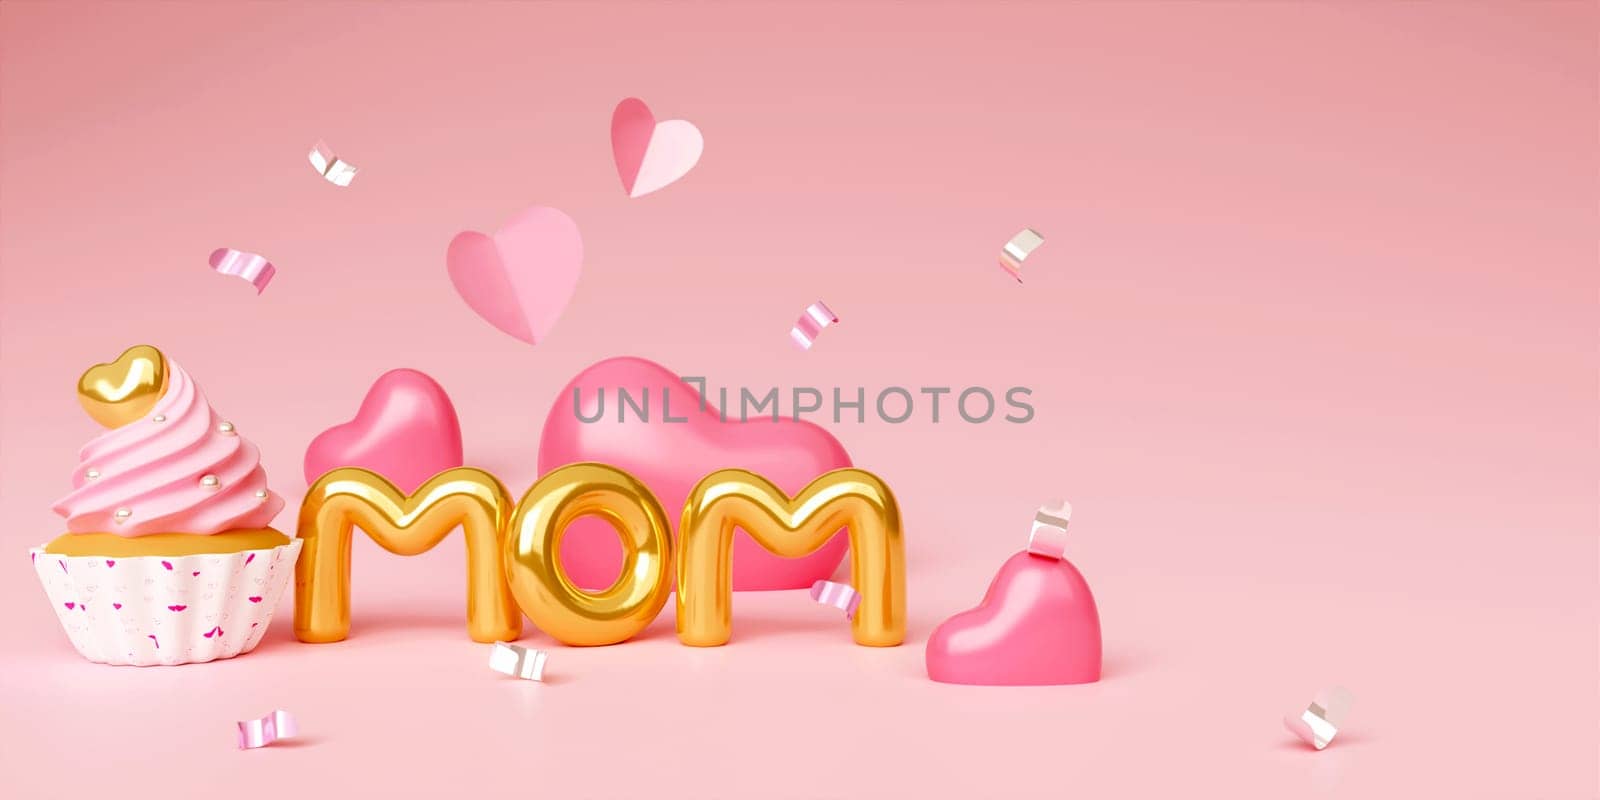 3d minimal pink banner background, suitable for Mother's Day. Mom balloon words with cup cake and heart balloon shape. 3D rendering illustration by meepiangraphic